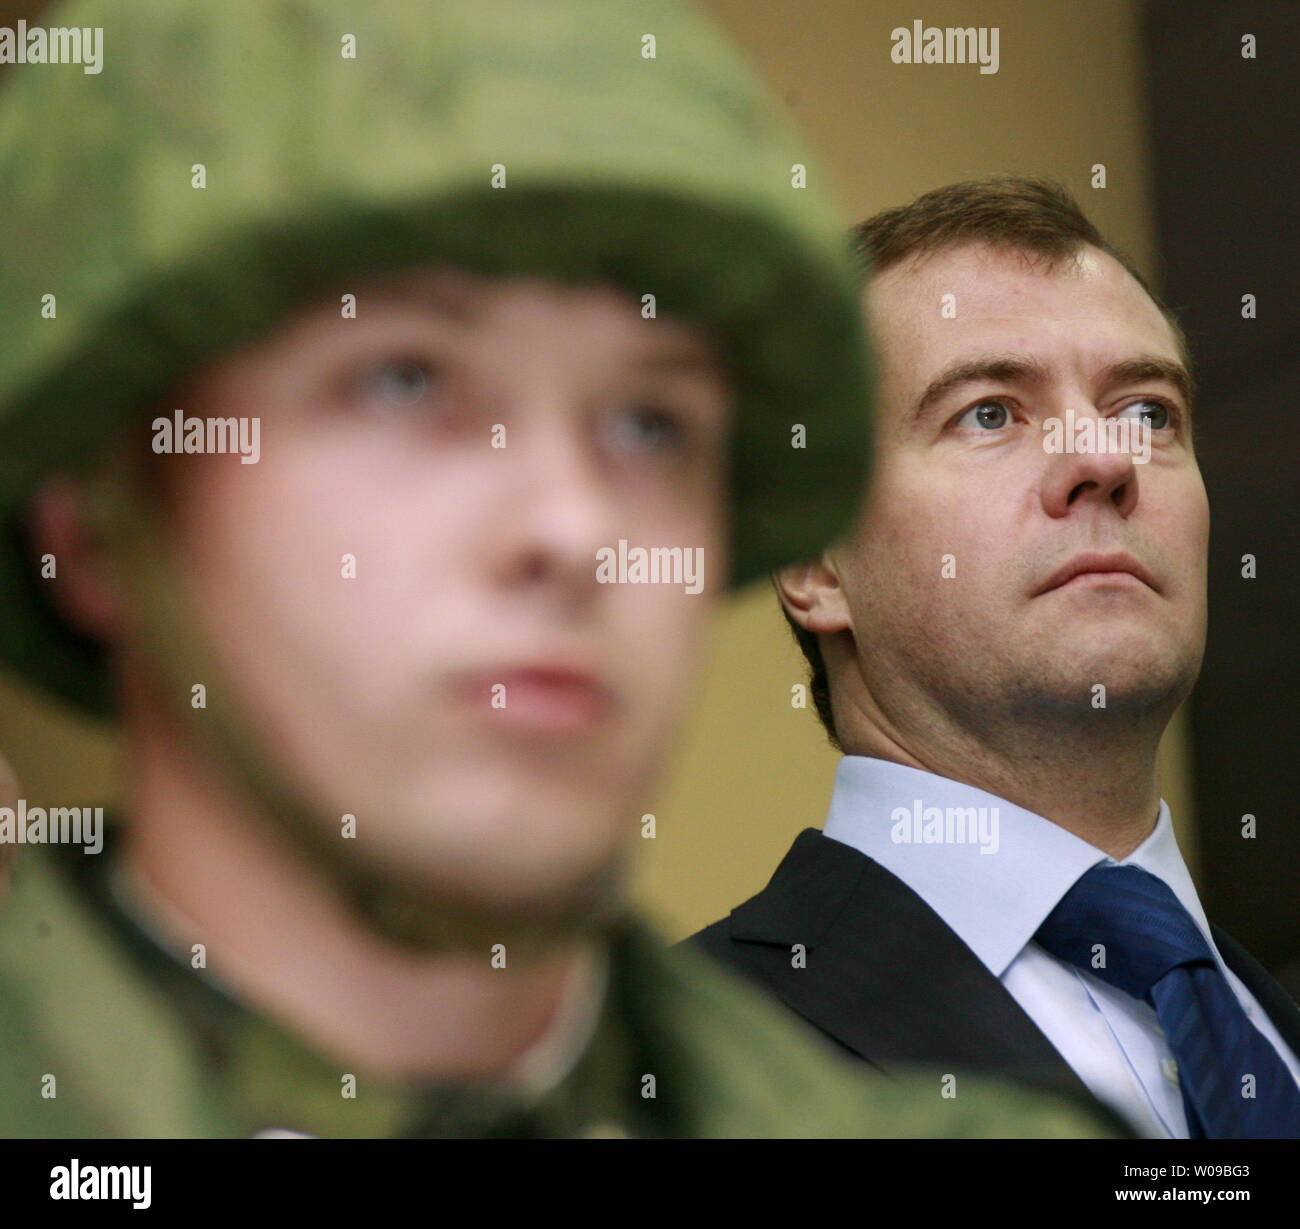 Russian President Dmitry Medvedev (R) visits a military academy in Kostroma, some 300 km (188 miles) northeast of Moscow, on May 15, 2008. Medvedev promised on Thursday to provide the necessary funding for Russian nuclear forces to counter global threats. (UPI Photo/Anatoli Zhdanov) Stock Photo